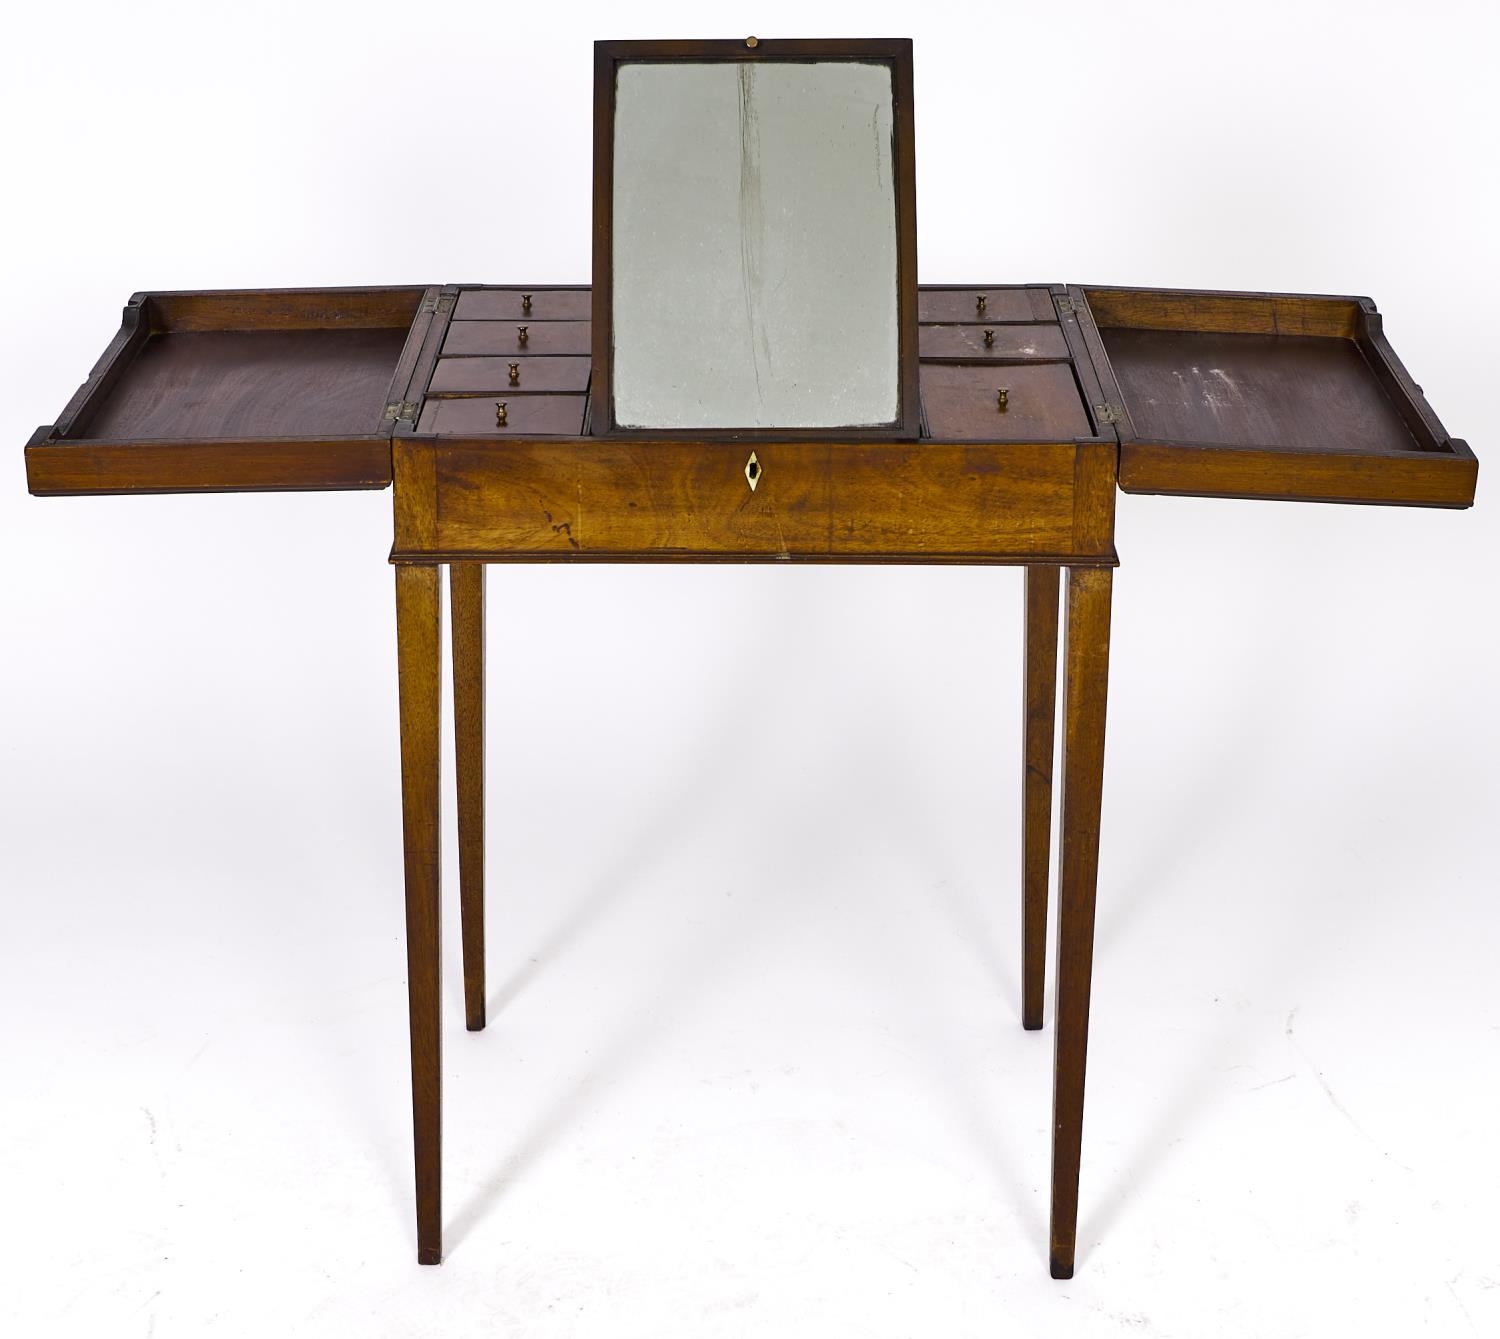 A George III mahogany dressing table, c1800, the top hinged at the sides revealing an interior - Image 2 of 2